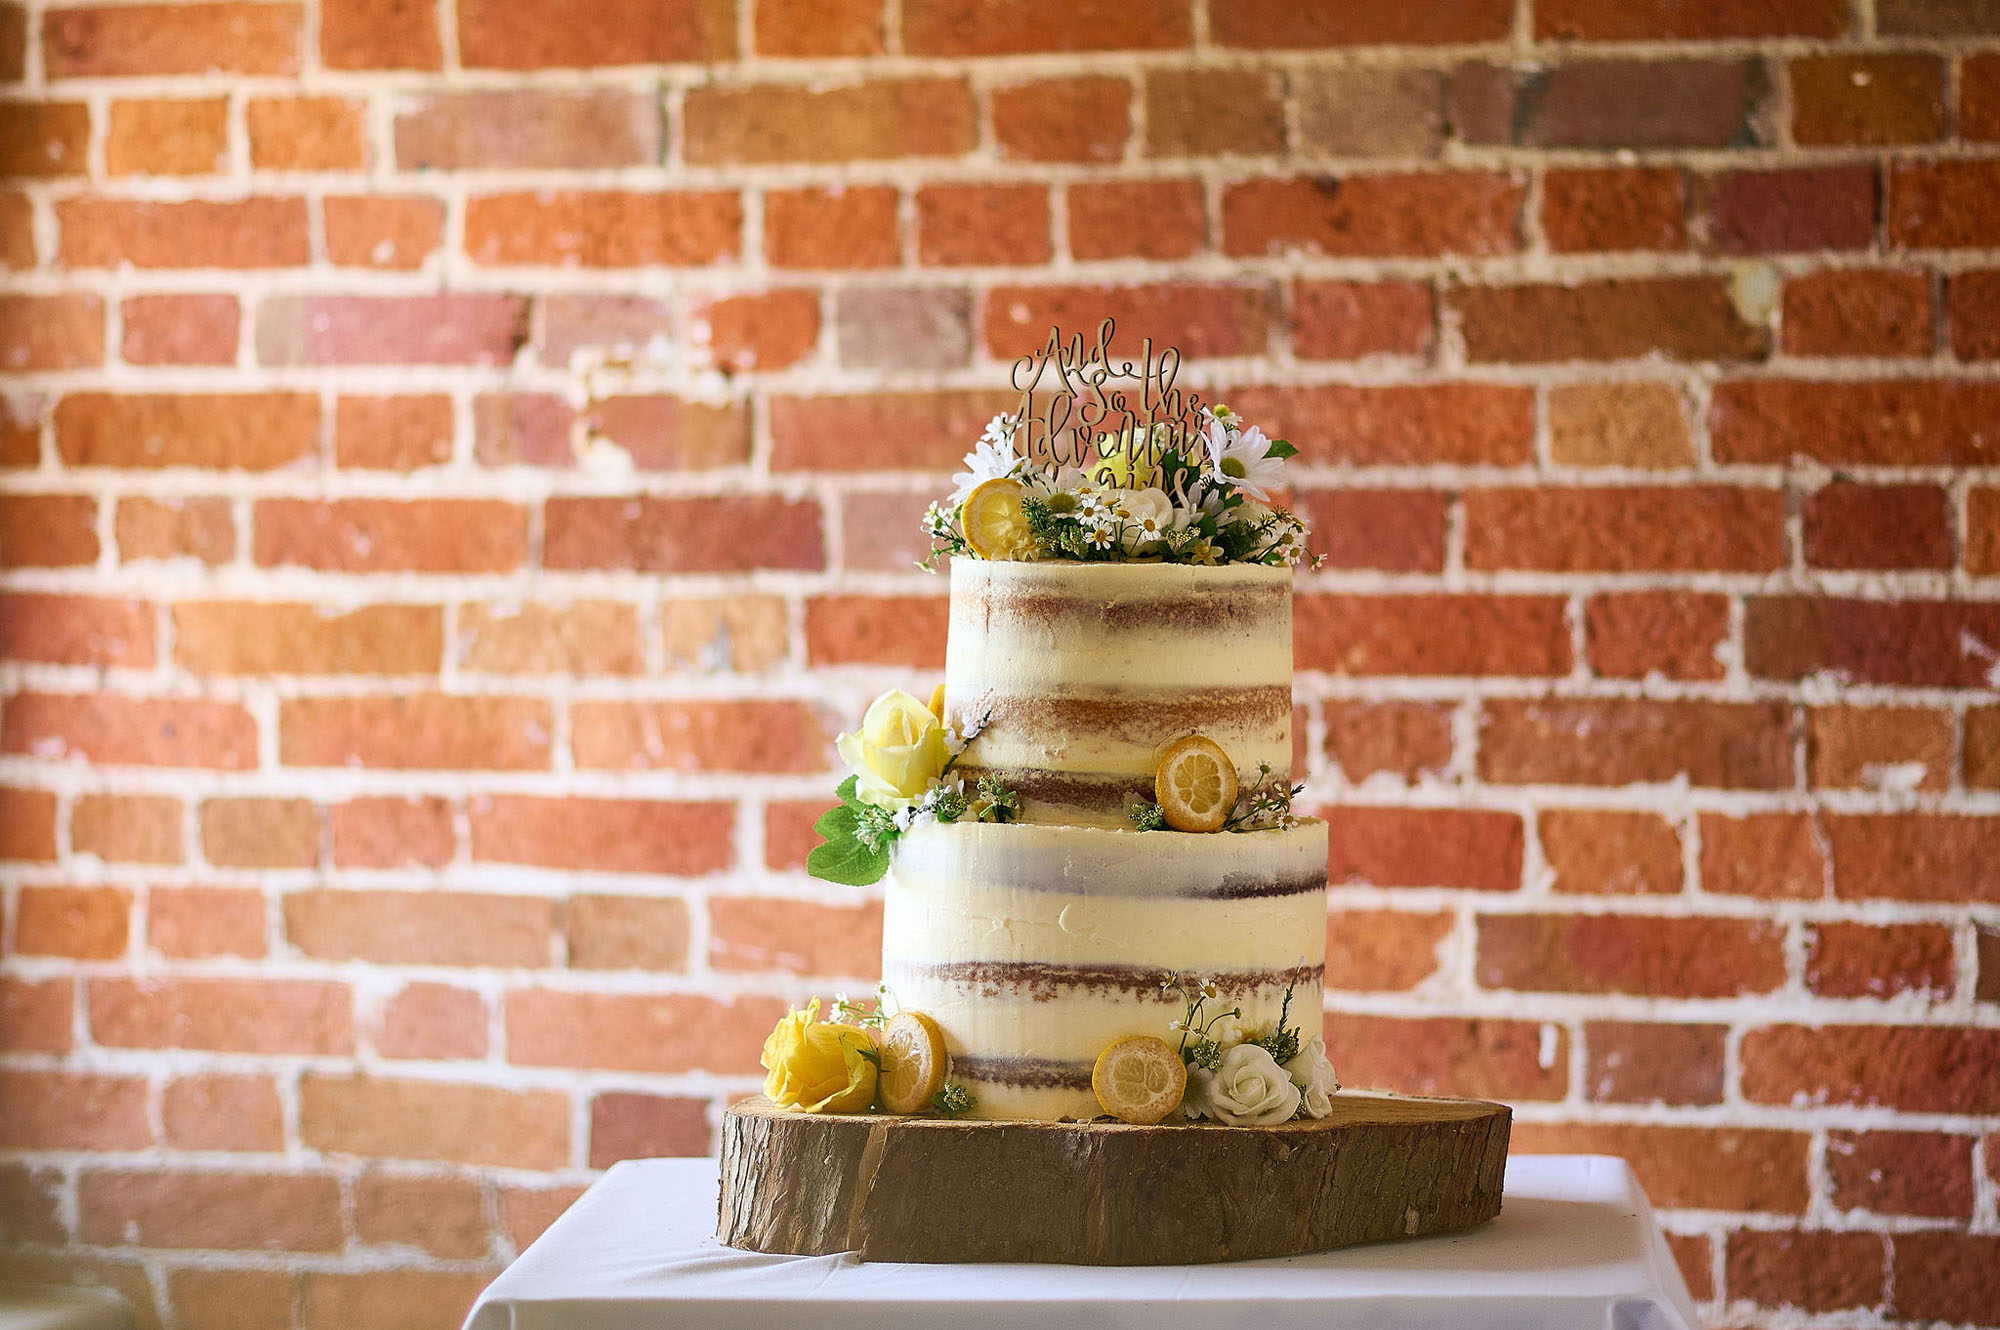 Joe and Jess's elegant rustic wedding at Sopley Mill. We love their bright yellow florals, the rustic ambience of the mill and the photos by Libra Photographic